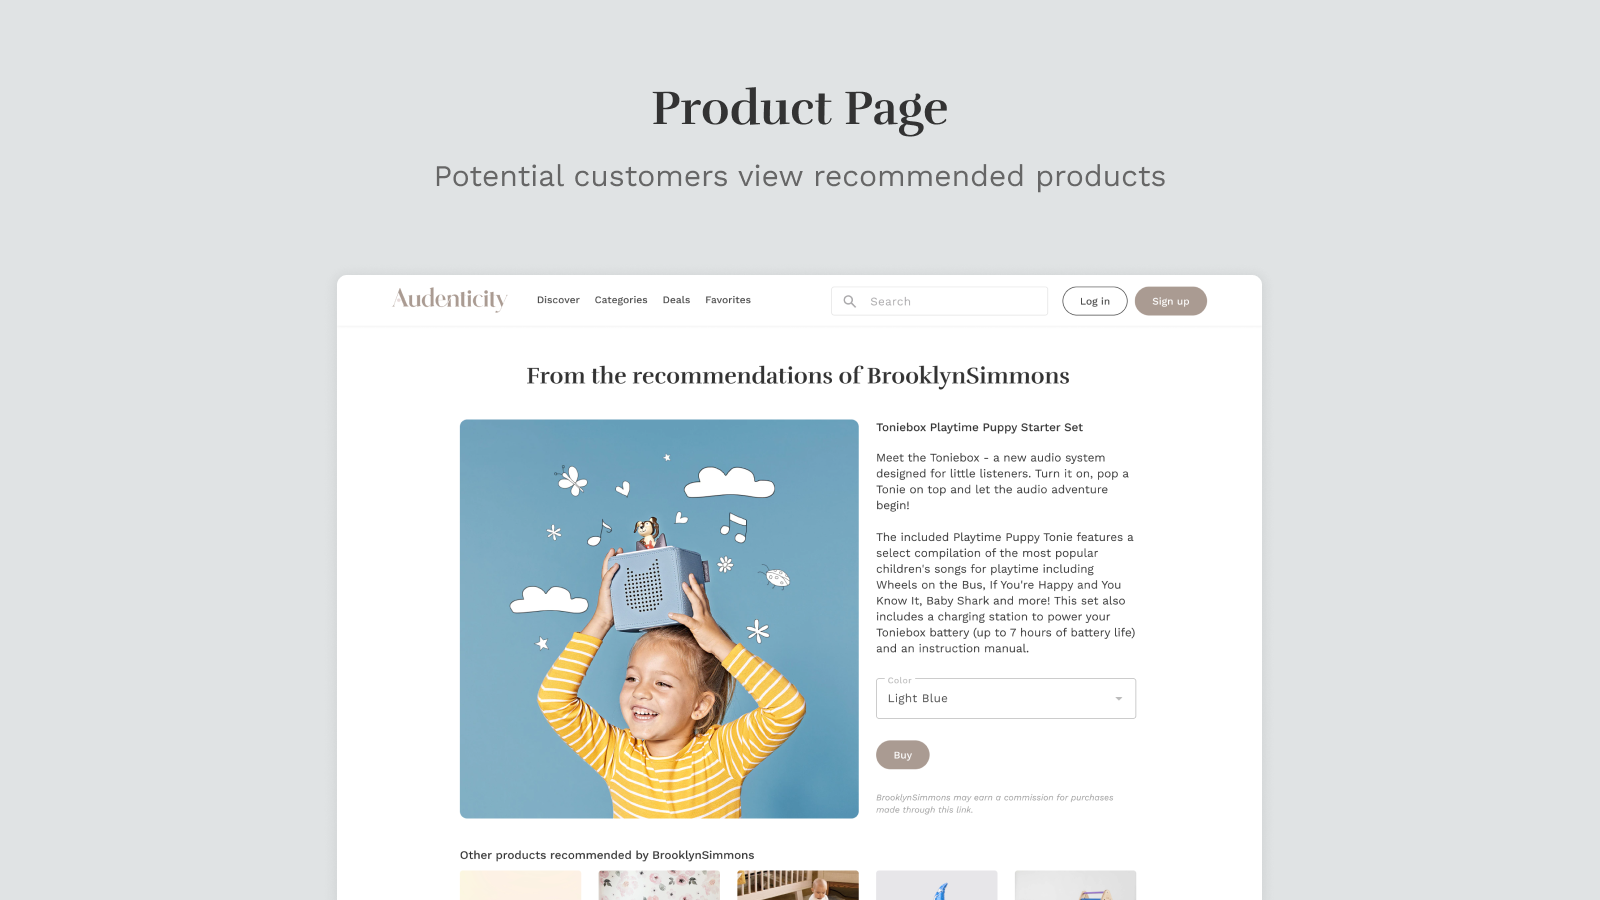 Customers view recommended products on the Product Page